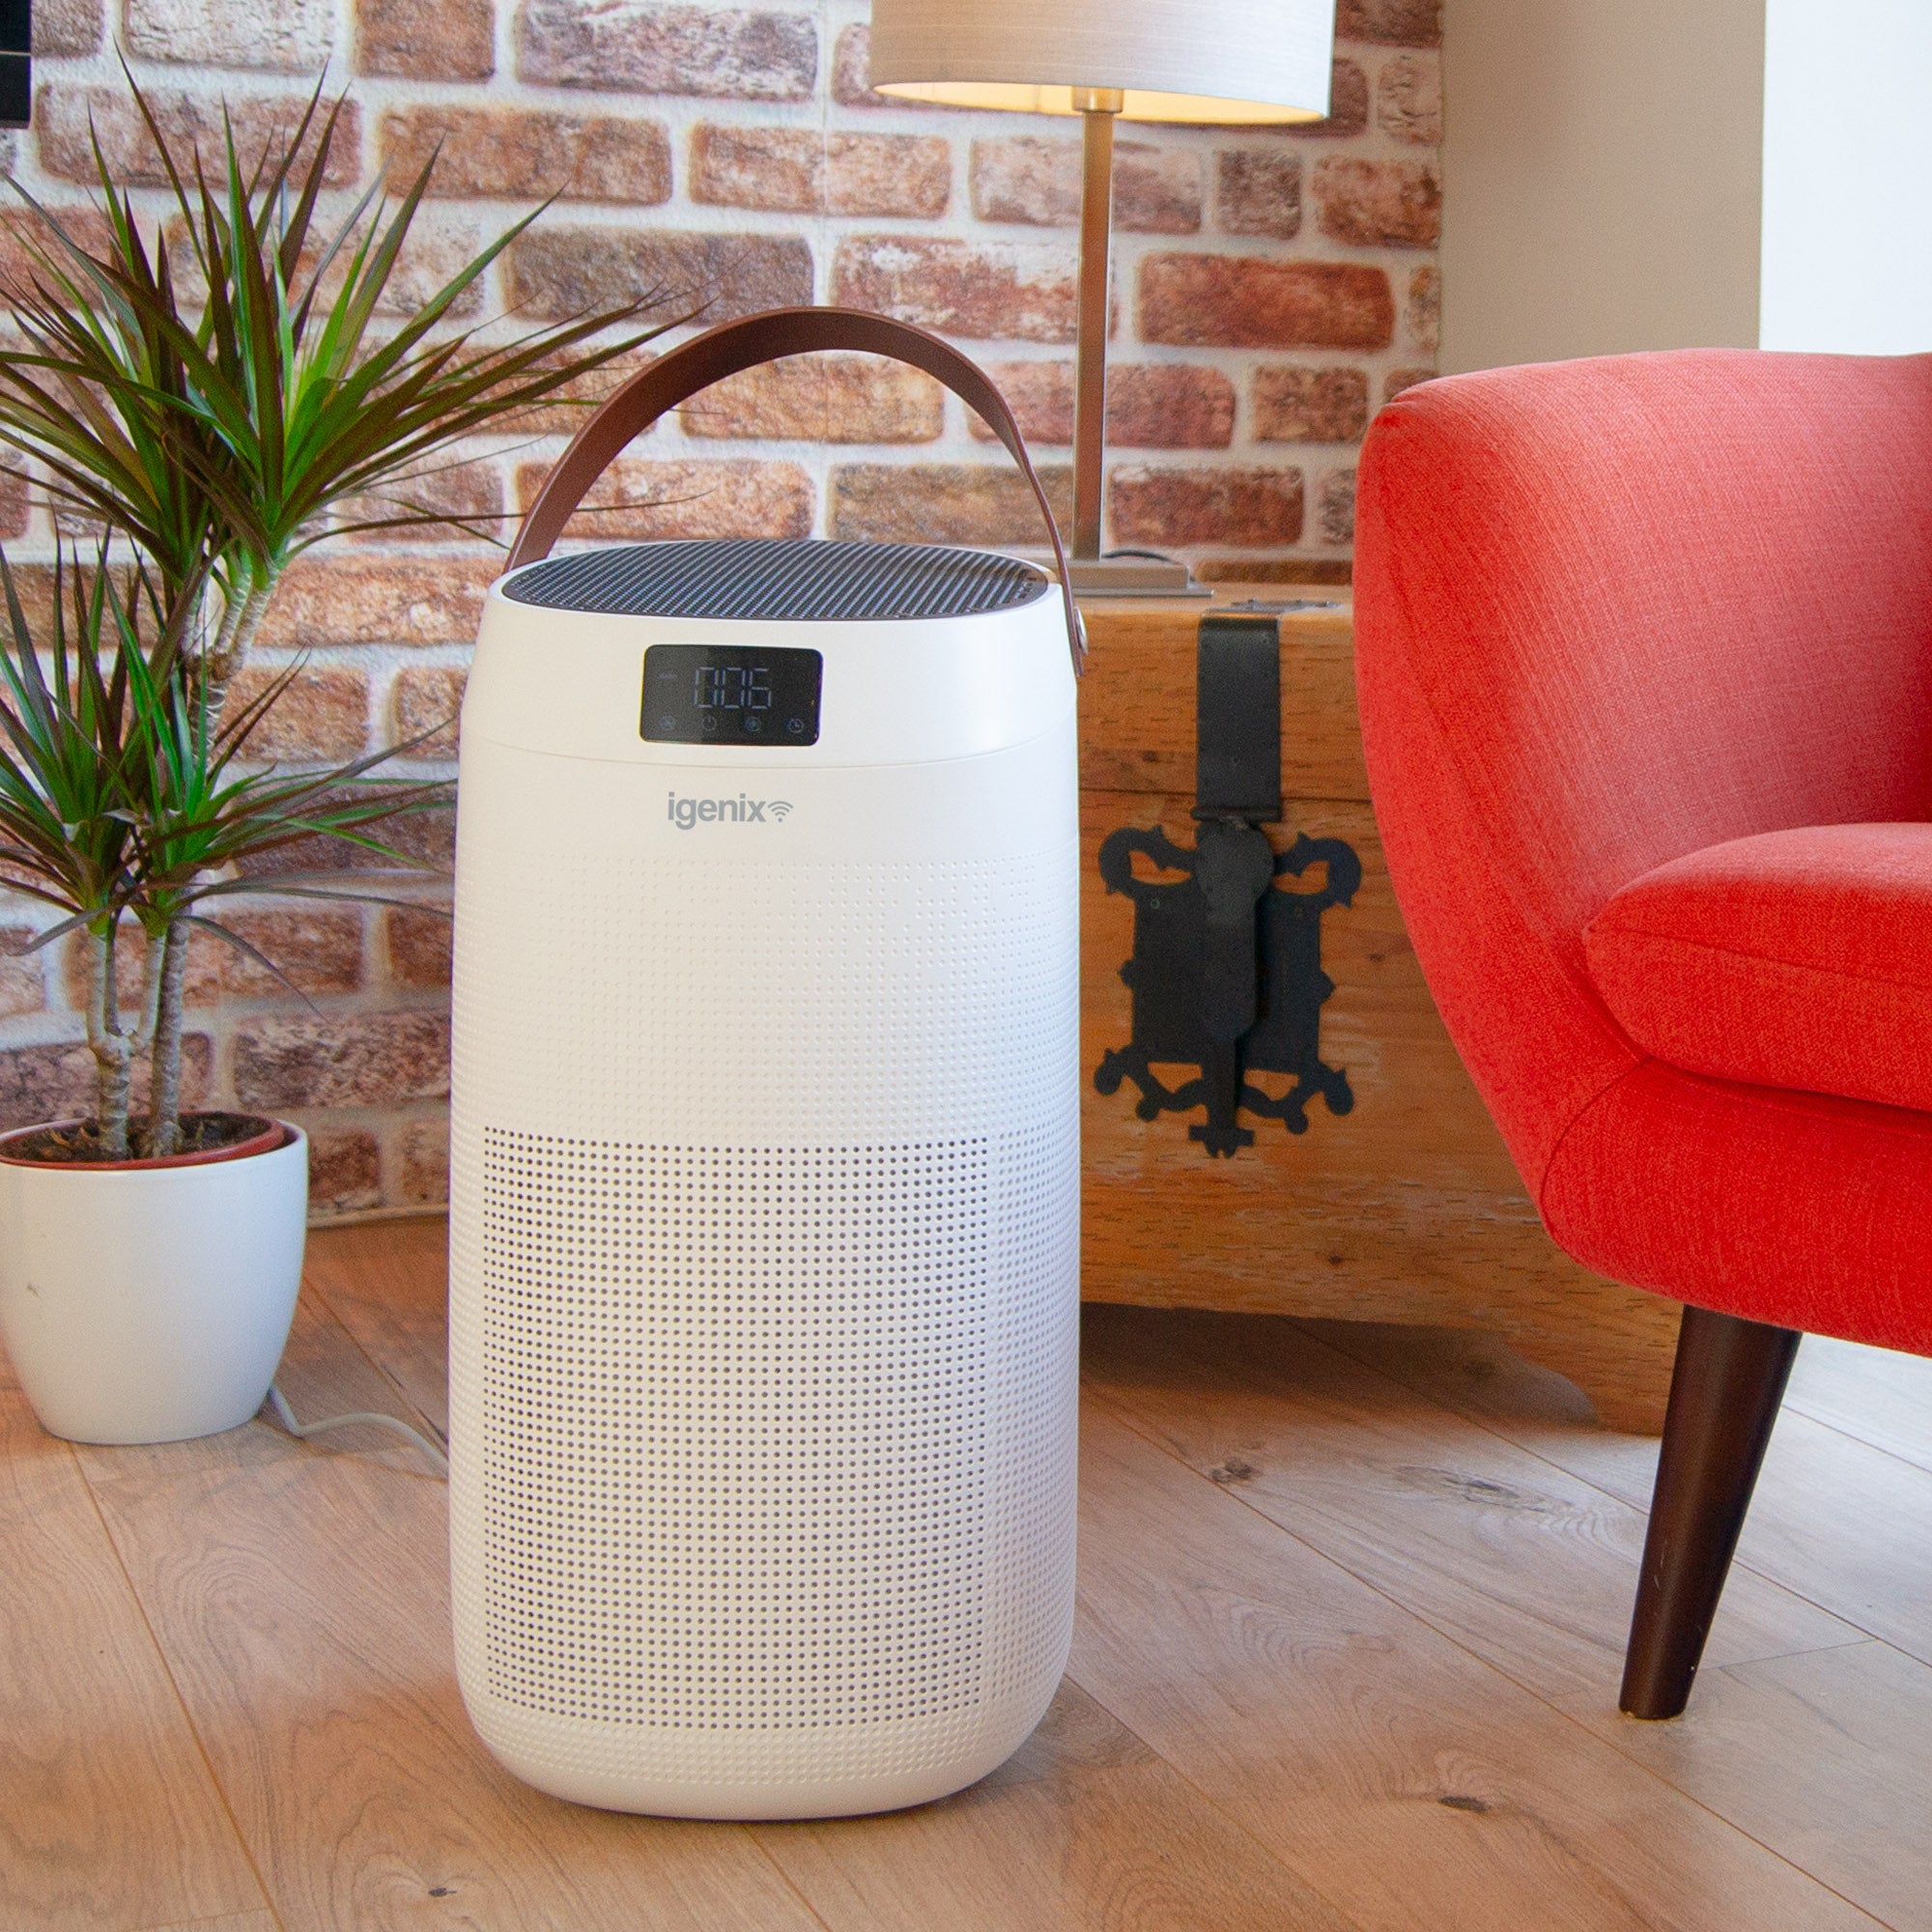 Smart Air Purifier with Amazon Alexa & Google Assistant